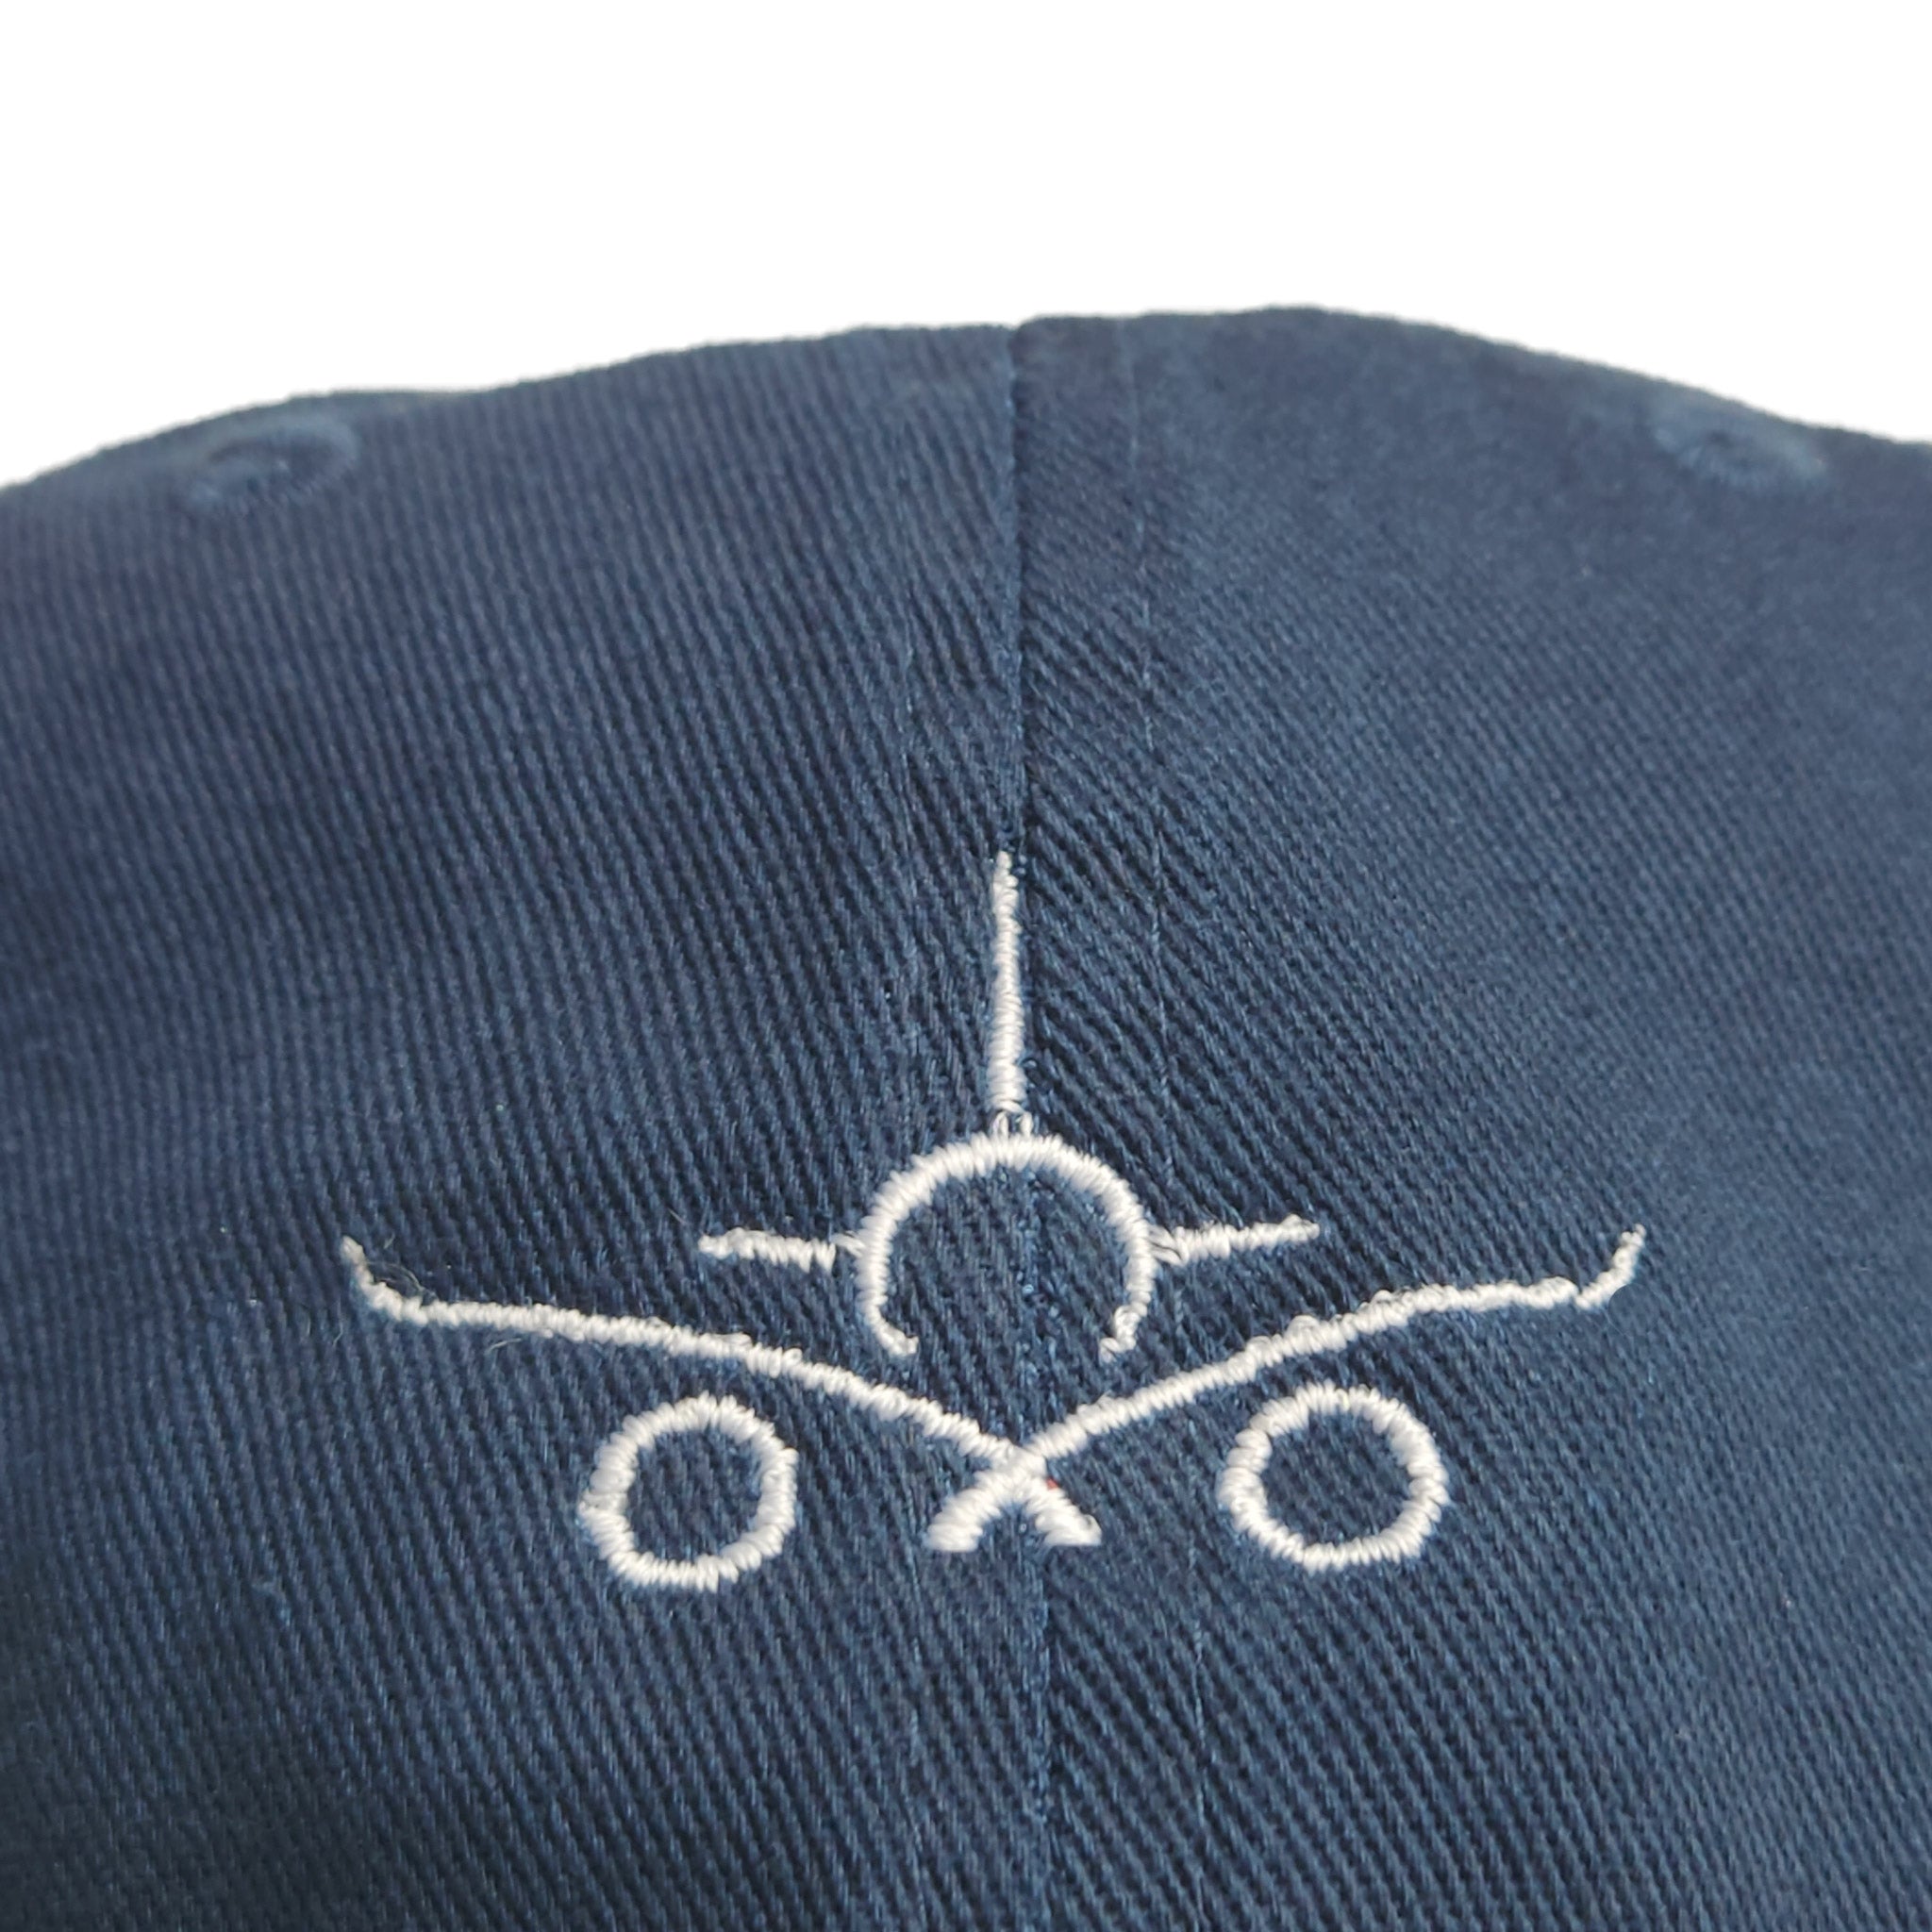 "Captain" - Unstructured Navy Blue Aviation Dad Cap w/ White Embroidered Logo